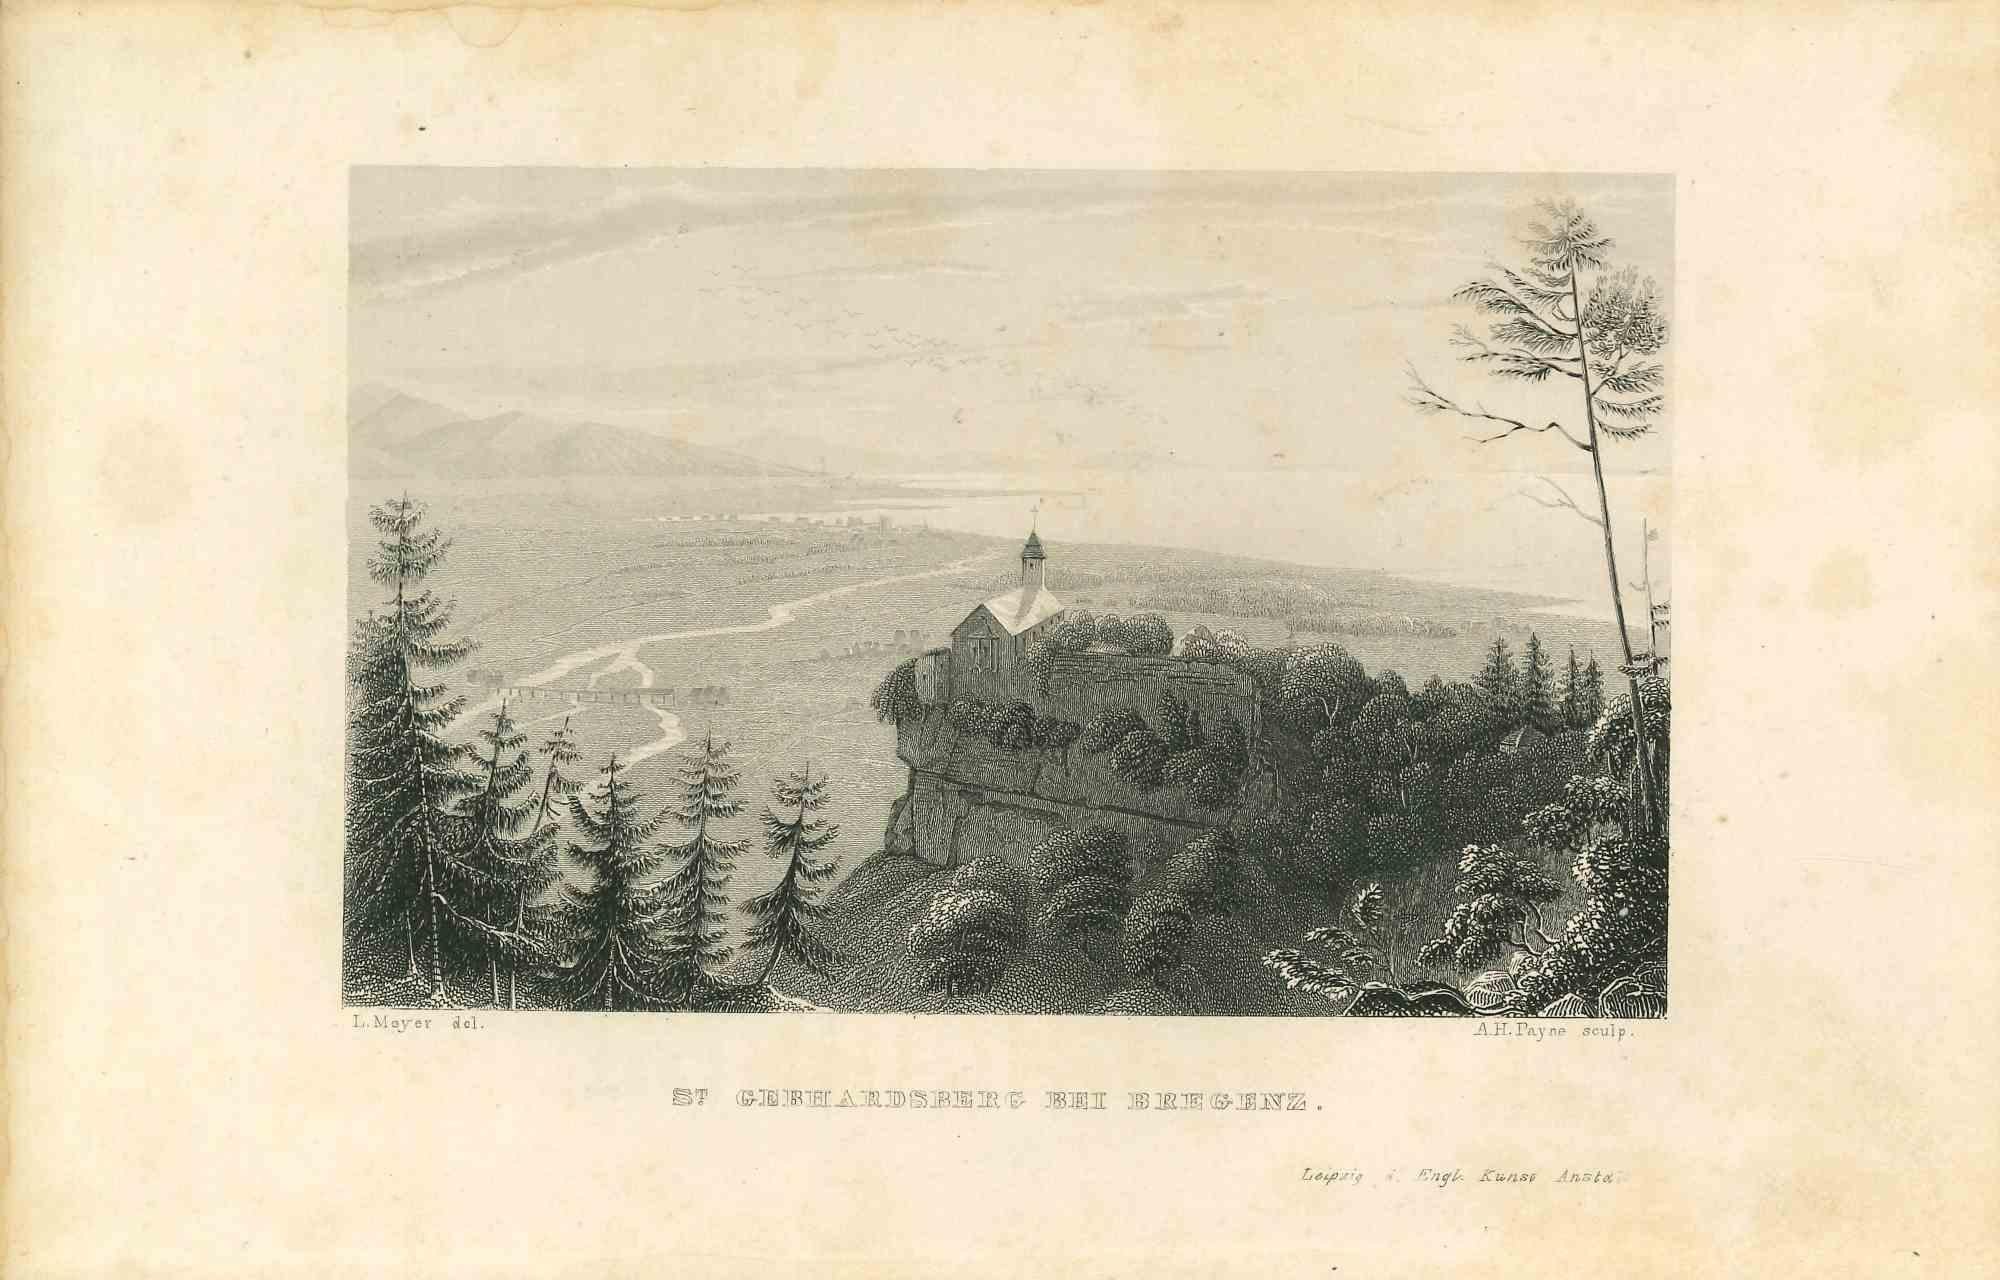 Unknown Landscape Print - Ancient View of St. Gebhardsberg - Original Lithograph - Mid-19th Century